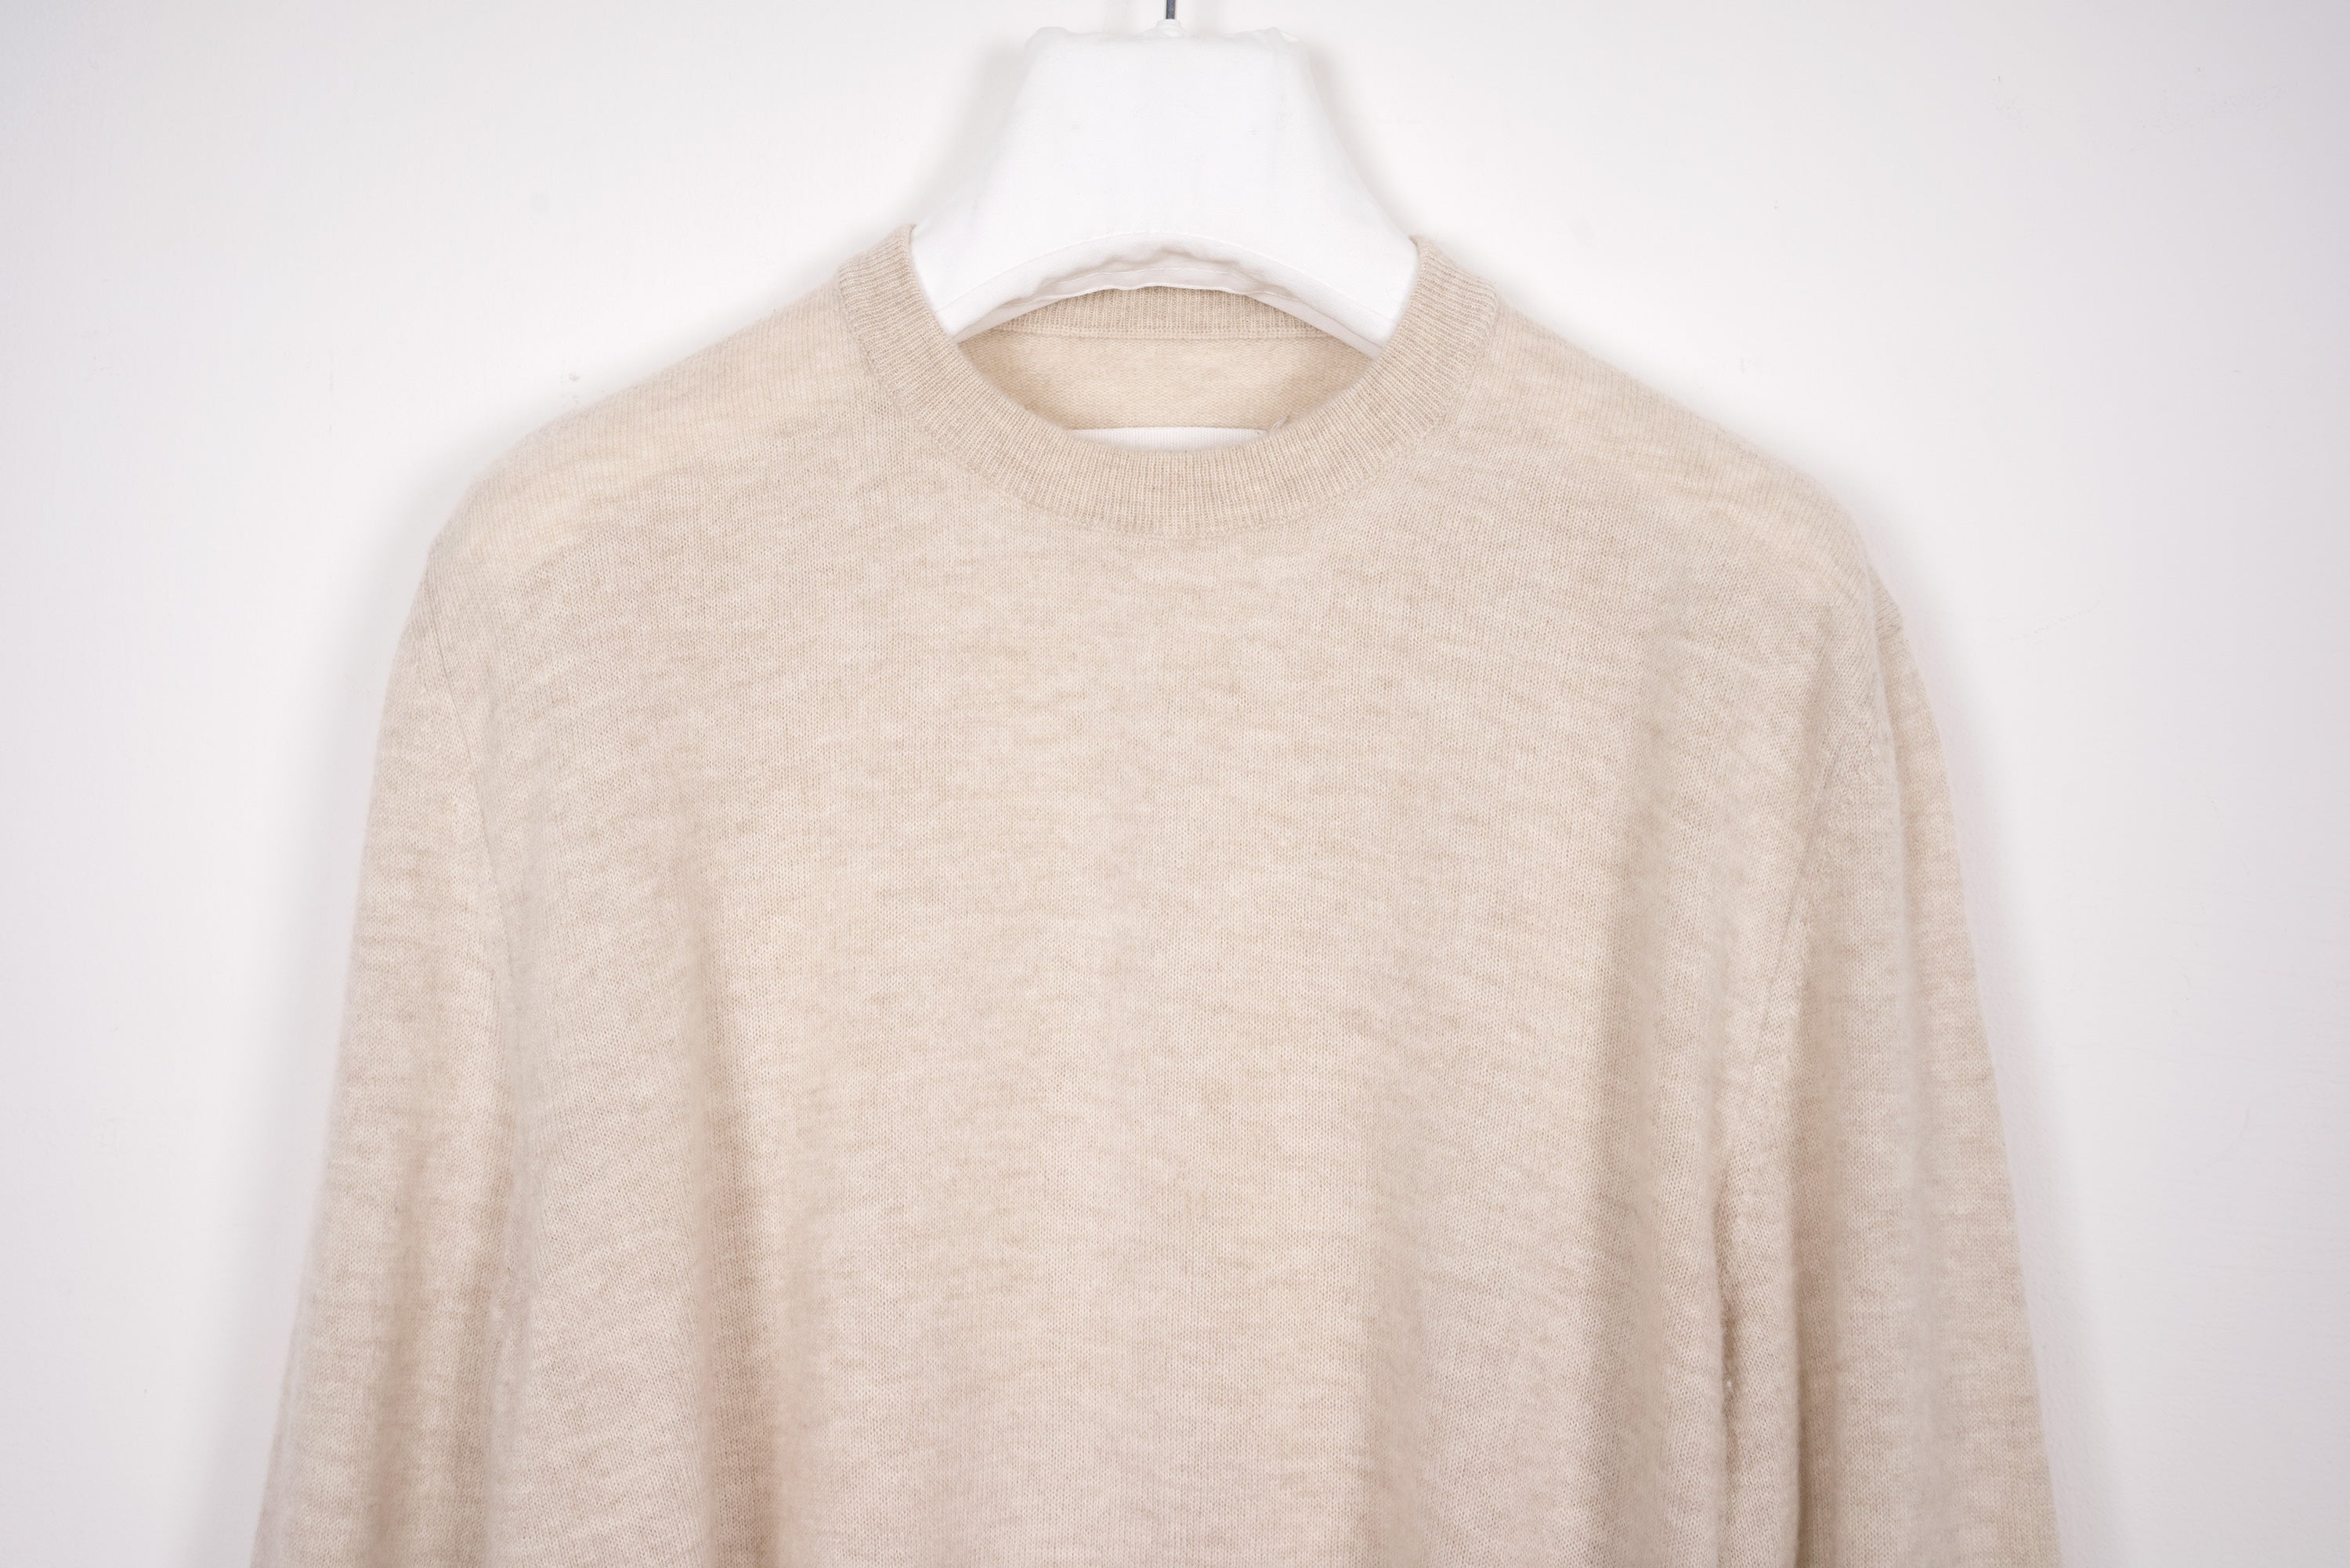 2008 A/W WOOL CREWNECK WITH LEATHER ELBOW PATCHES